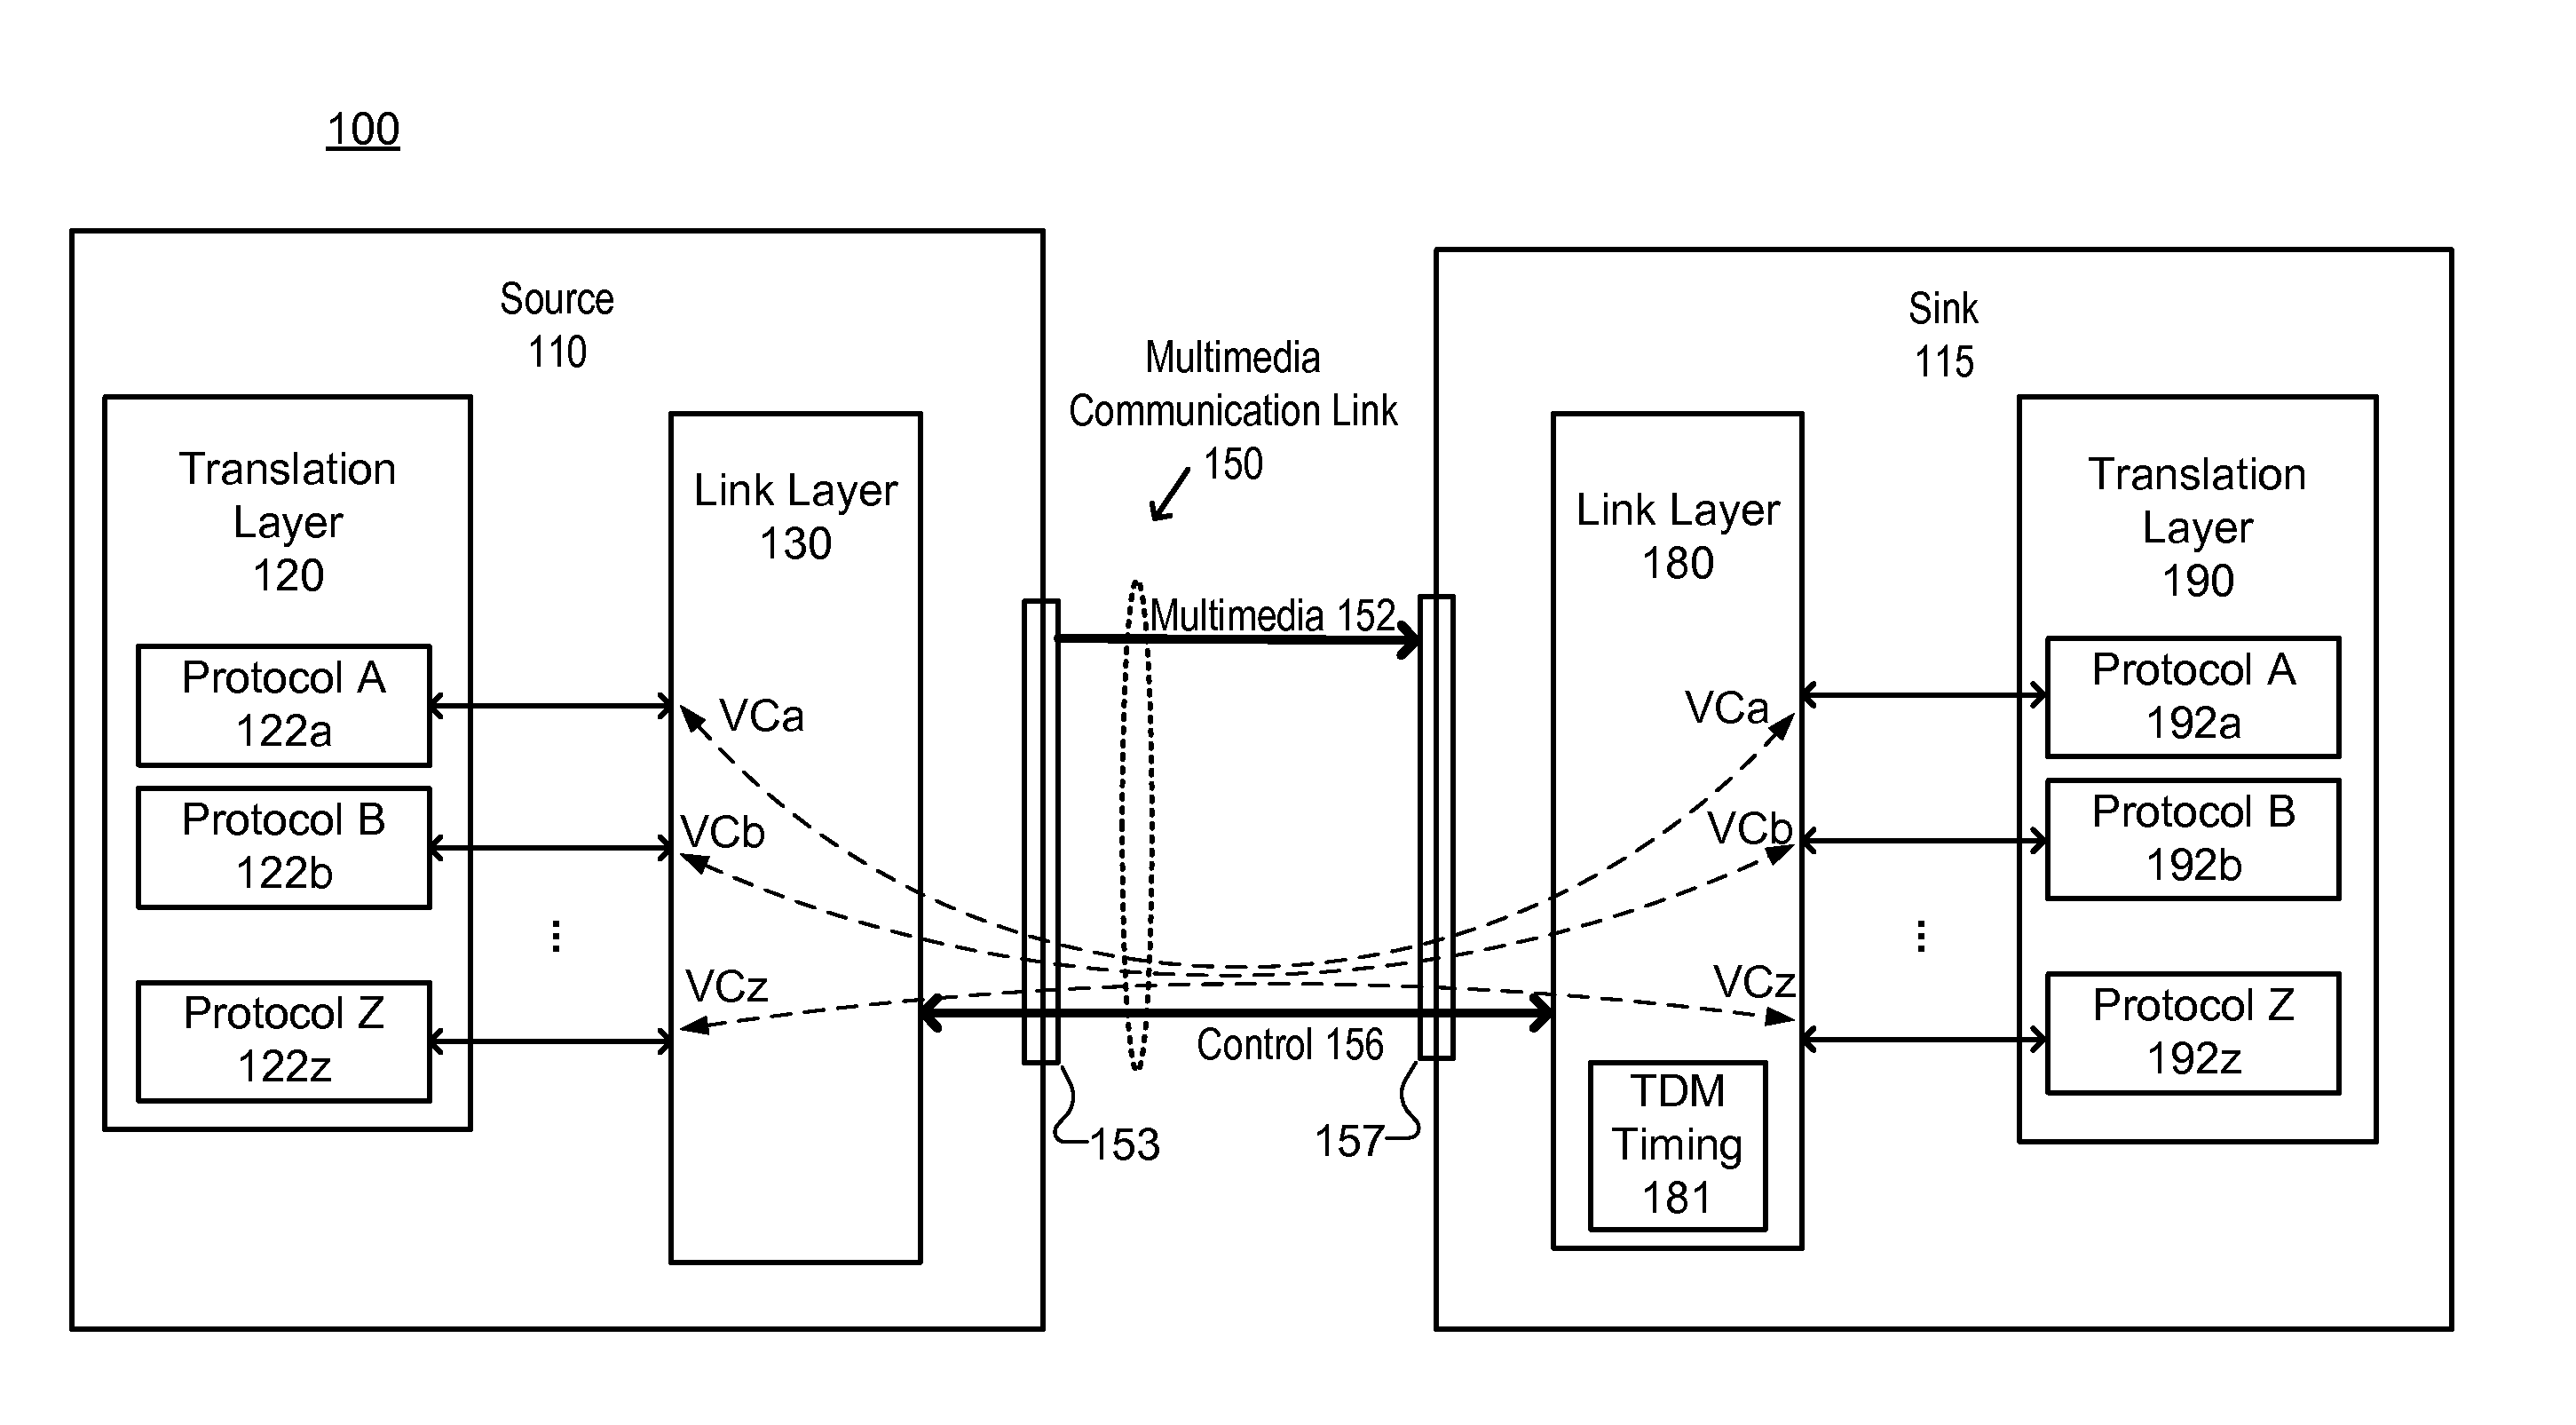 Phase Relationship Control for Control Channel of a Multimedia Communication Link